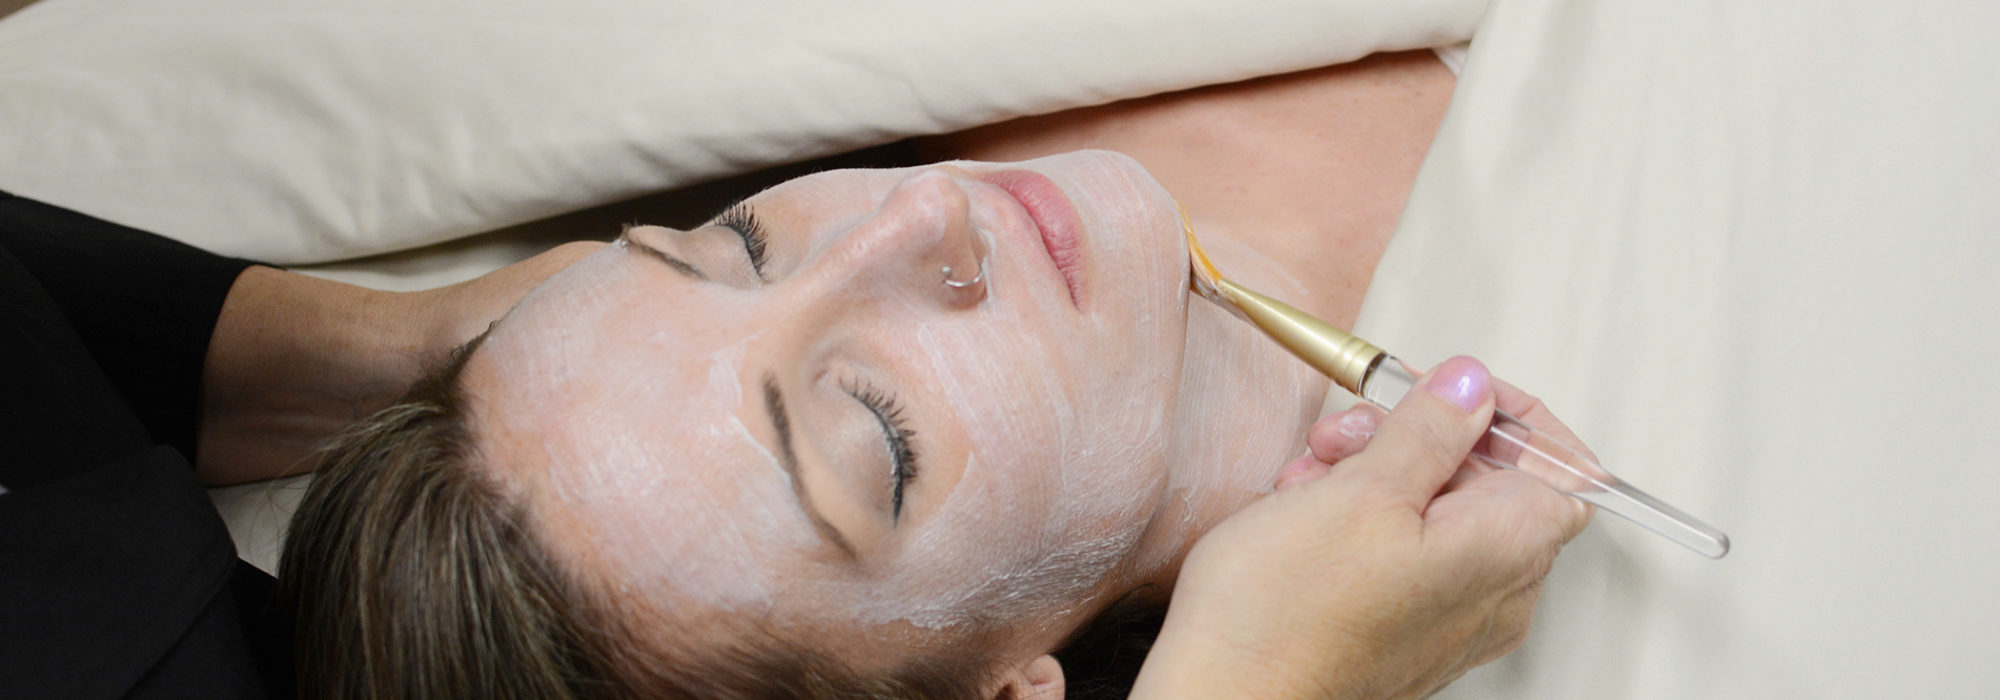 Custom facial treatment at Afterglow Providence